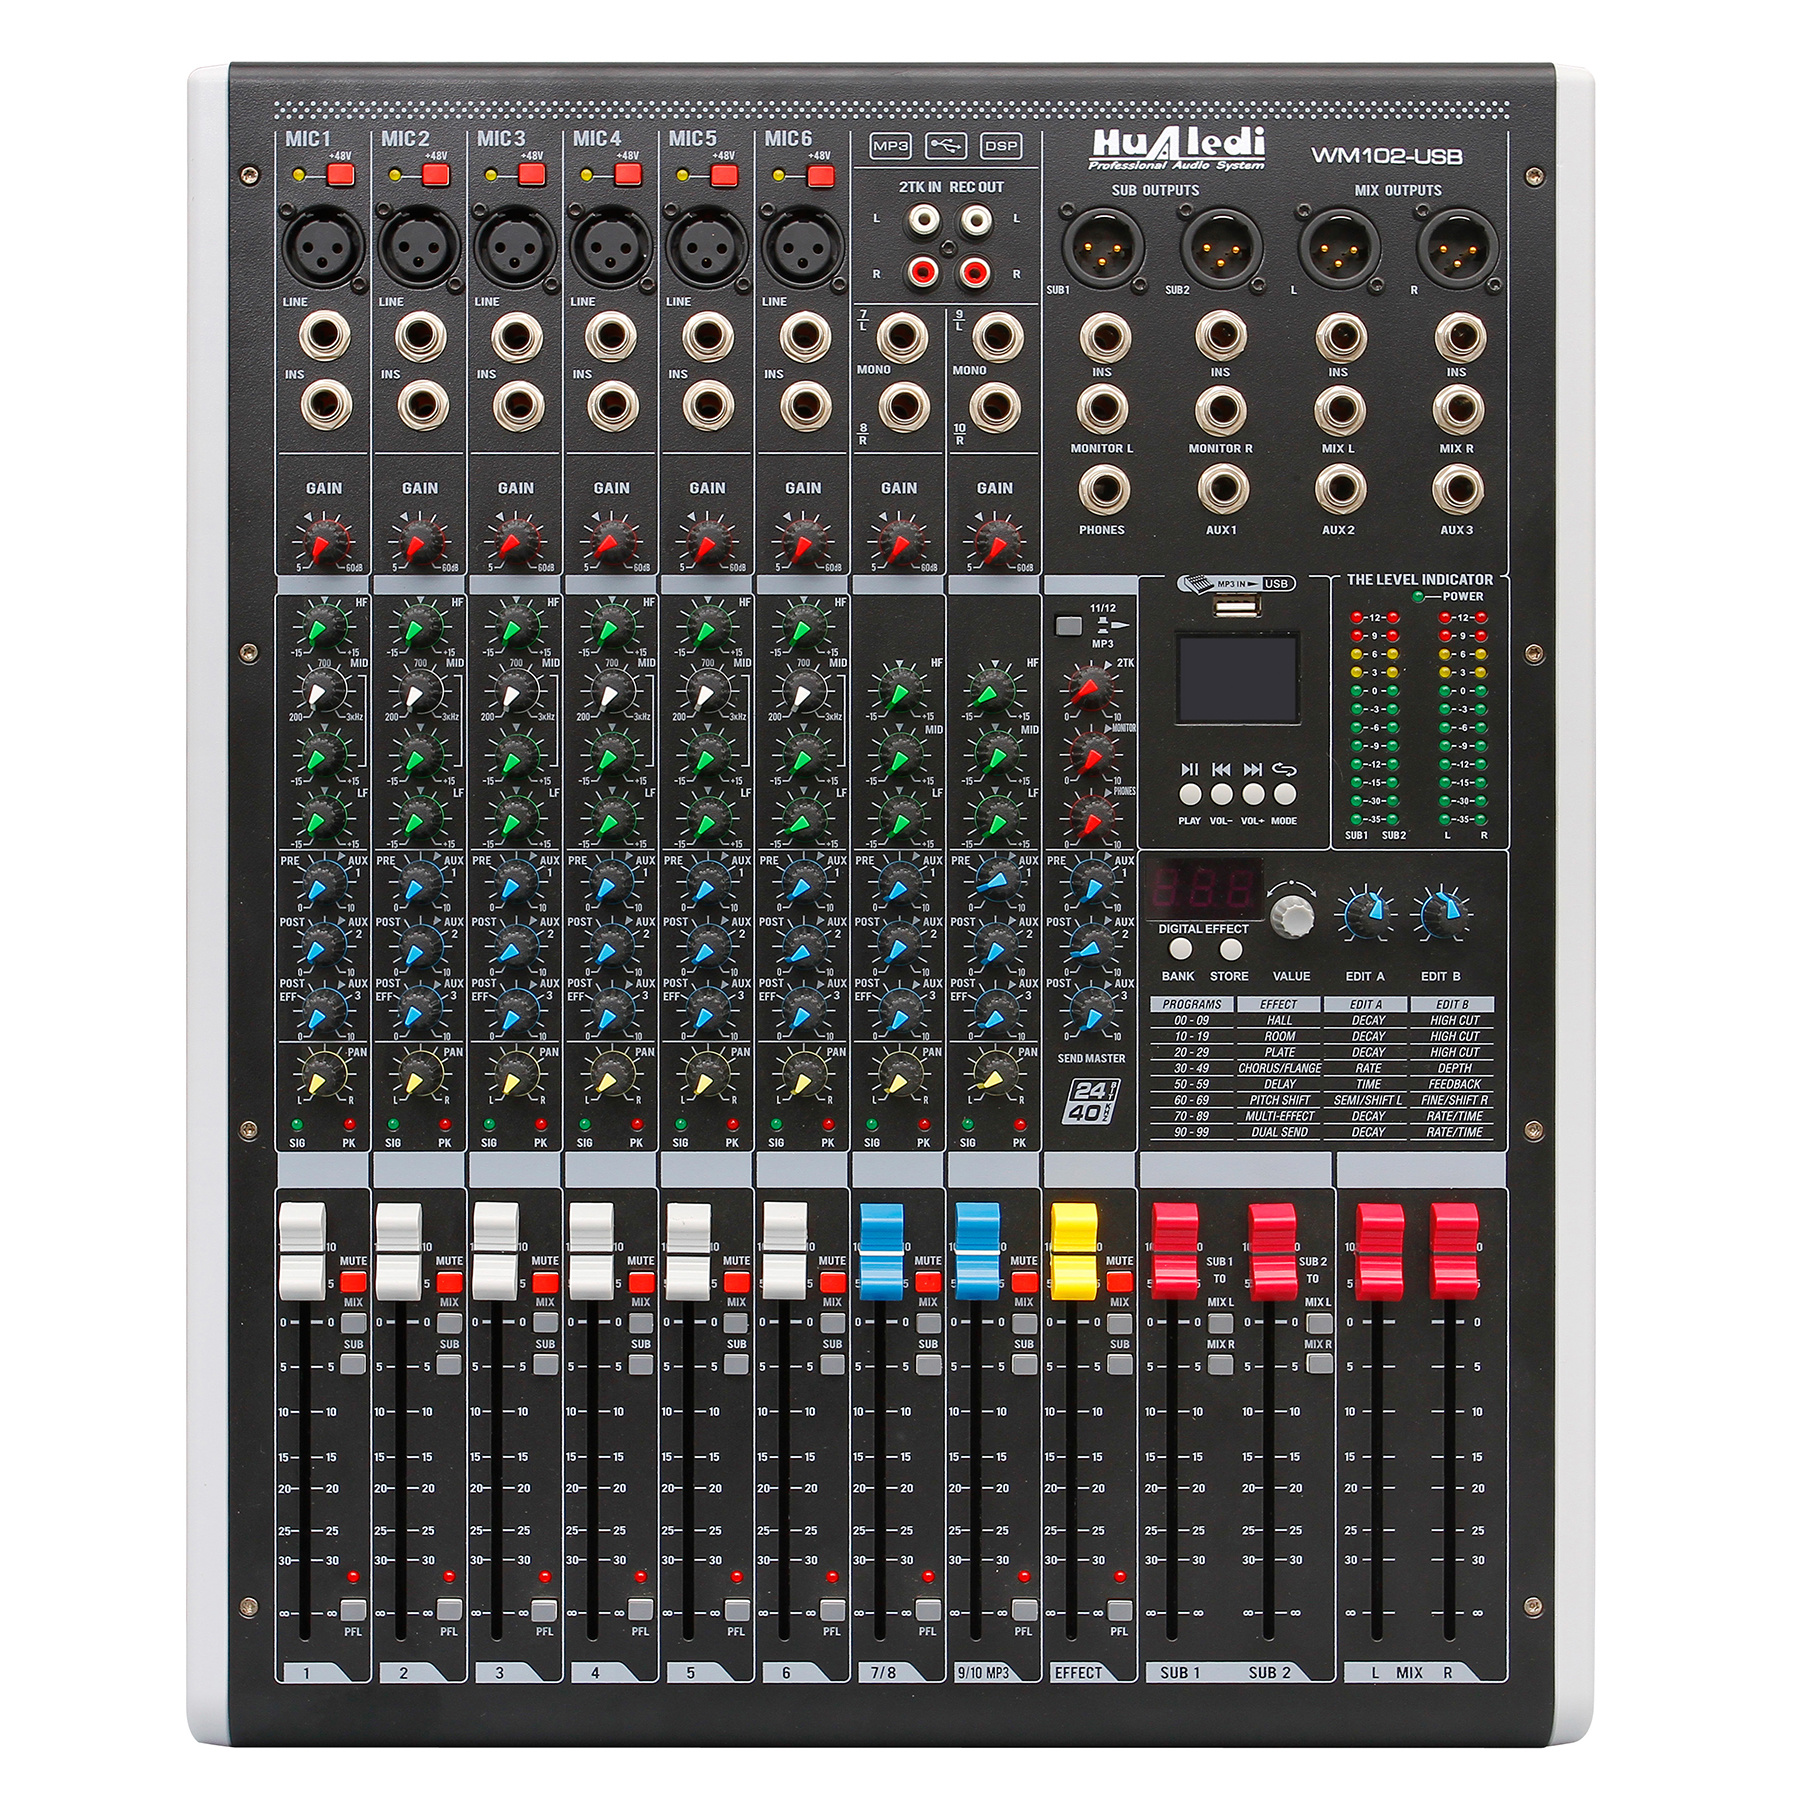 10 channels mixing console No group